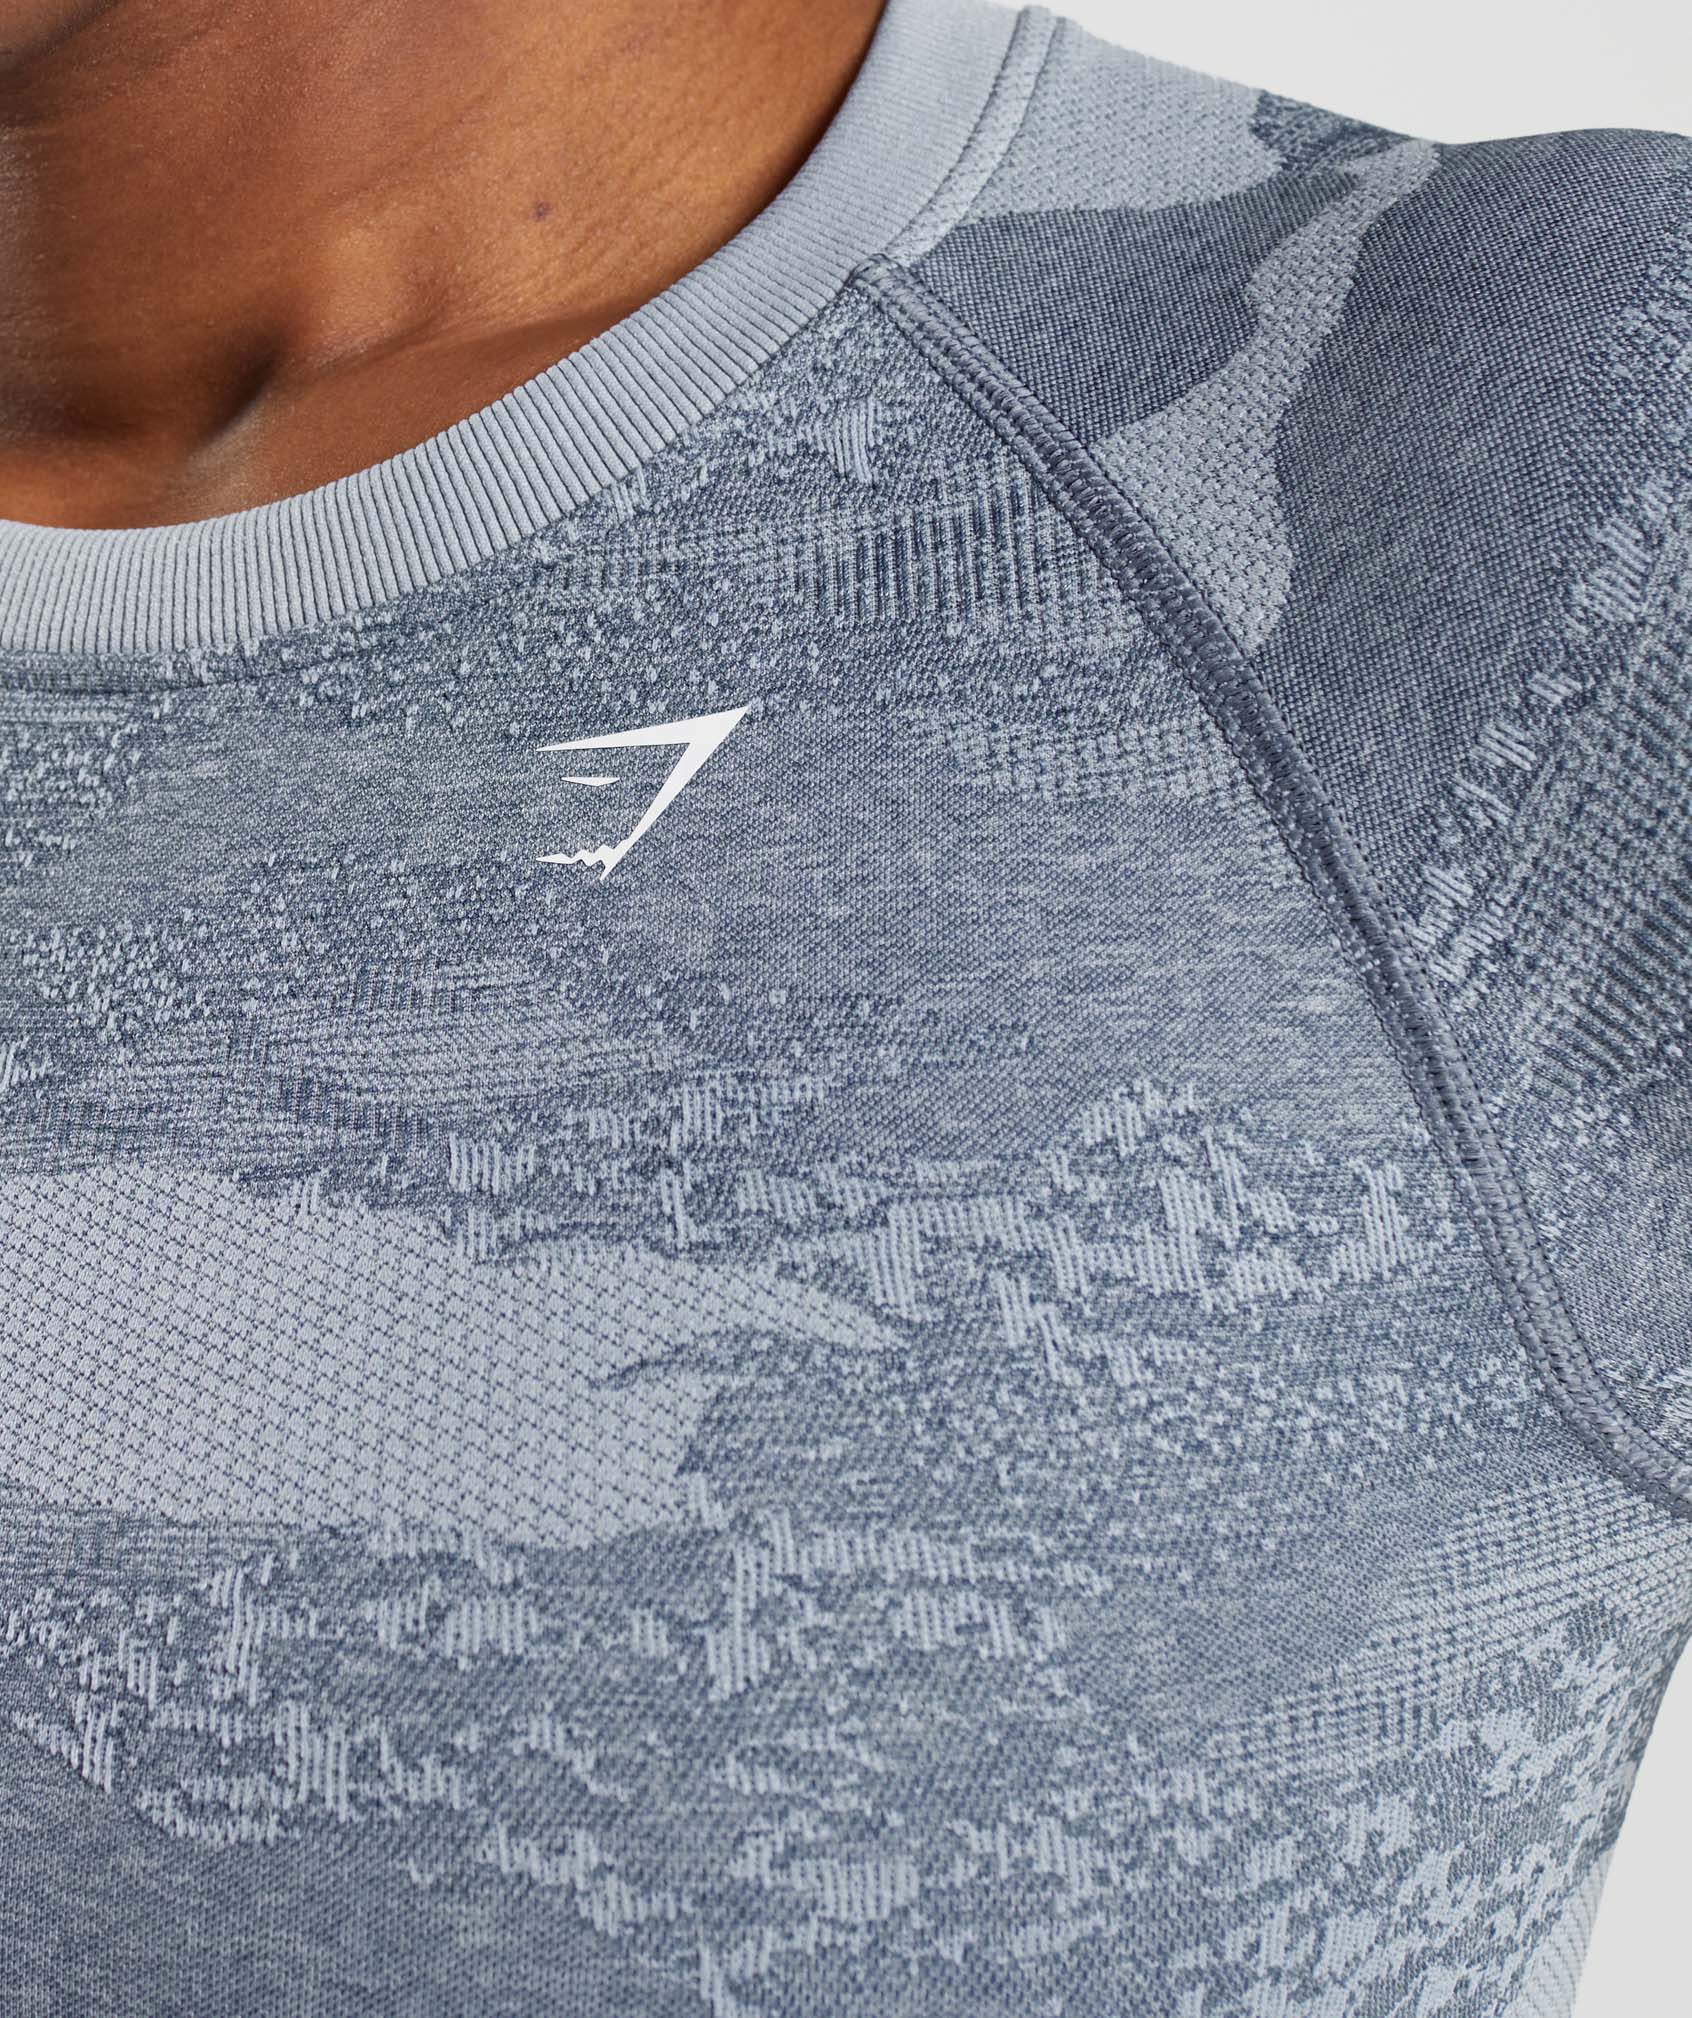 Gymshark Adapt Camo Seamless Lace Up Back Top - River Stone Grey